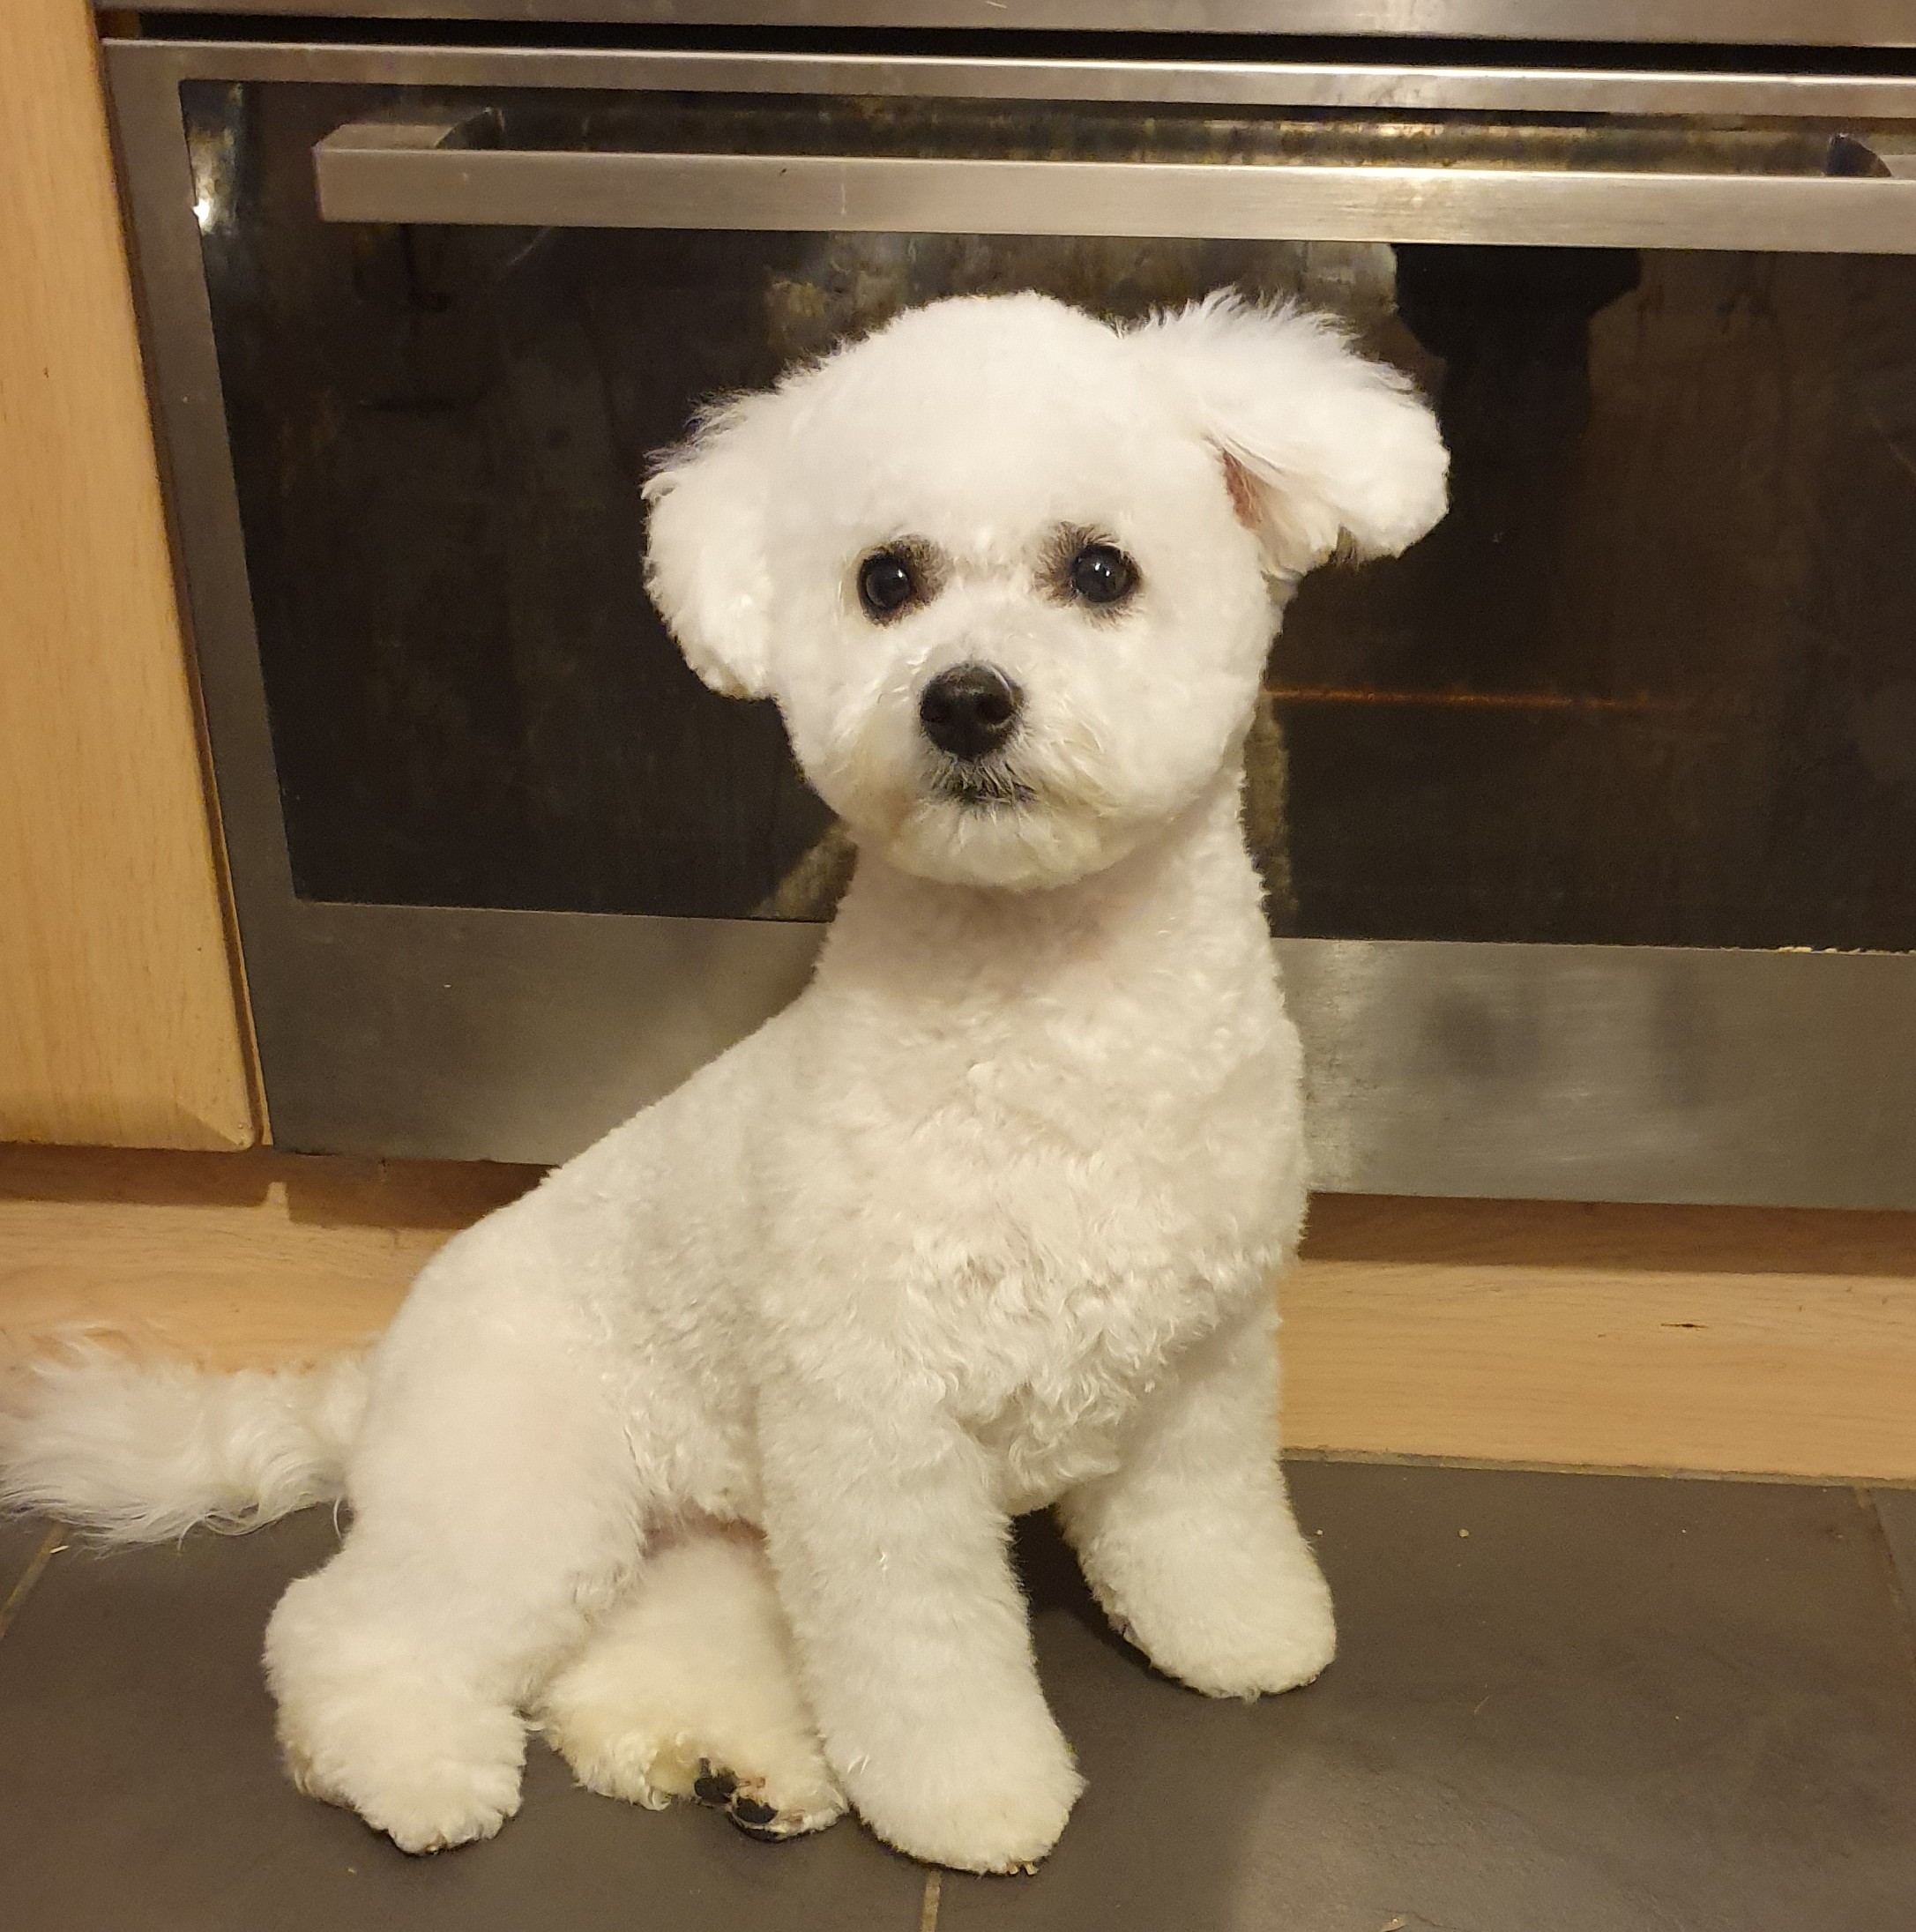 mum is top quality bichon fries with she is very pretty with a beautiful temperament  